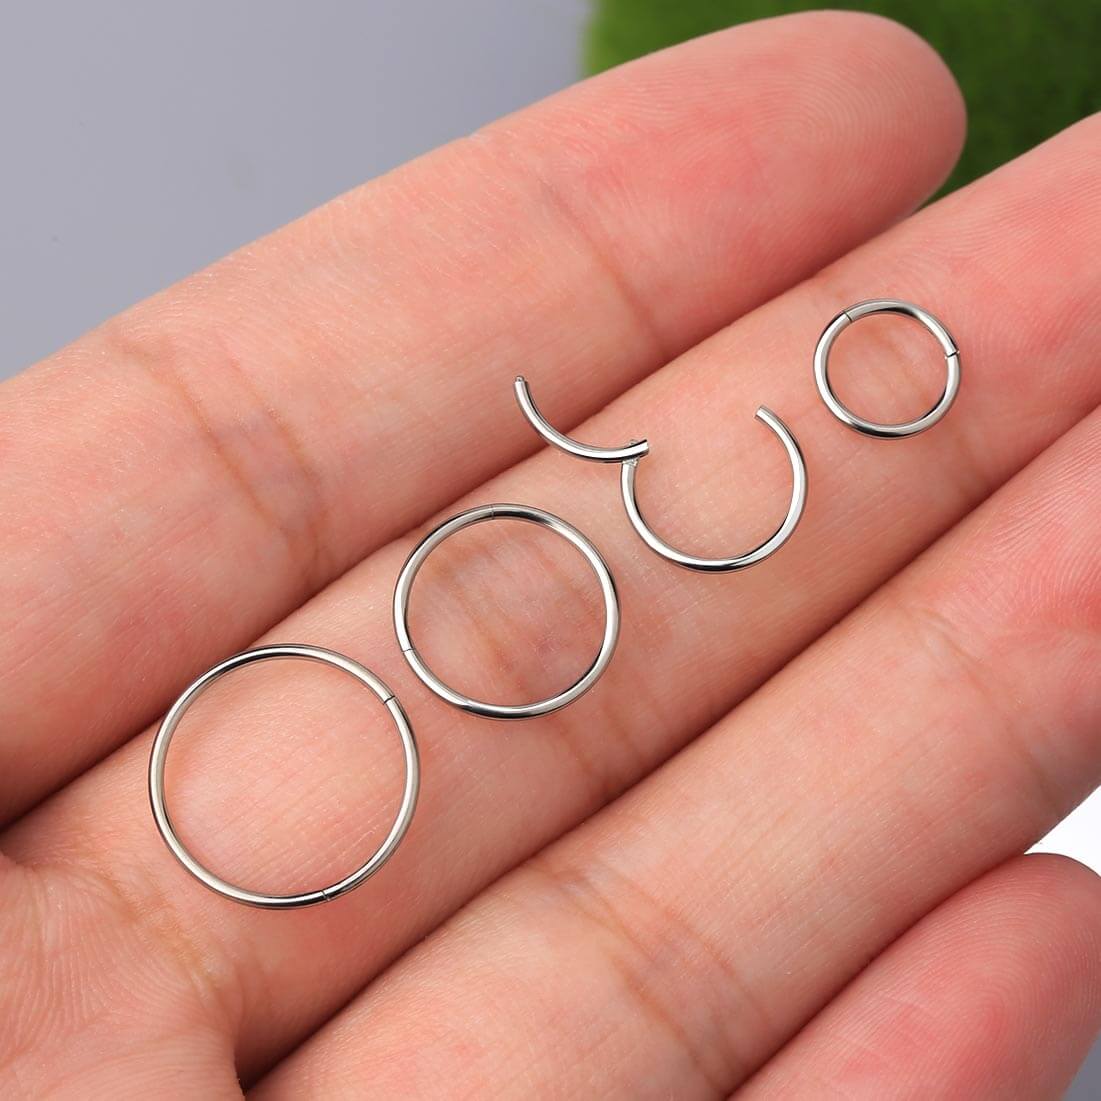 Buy G23 Titanium Septum Ring, Hinged Nose Ring, Nose Hoop Ring, Segment Nose  Ring, Septum Piercing, Nose Hoop, Body Piercing Jewelry, TS11 Online in  India - Etsy